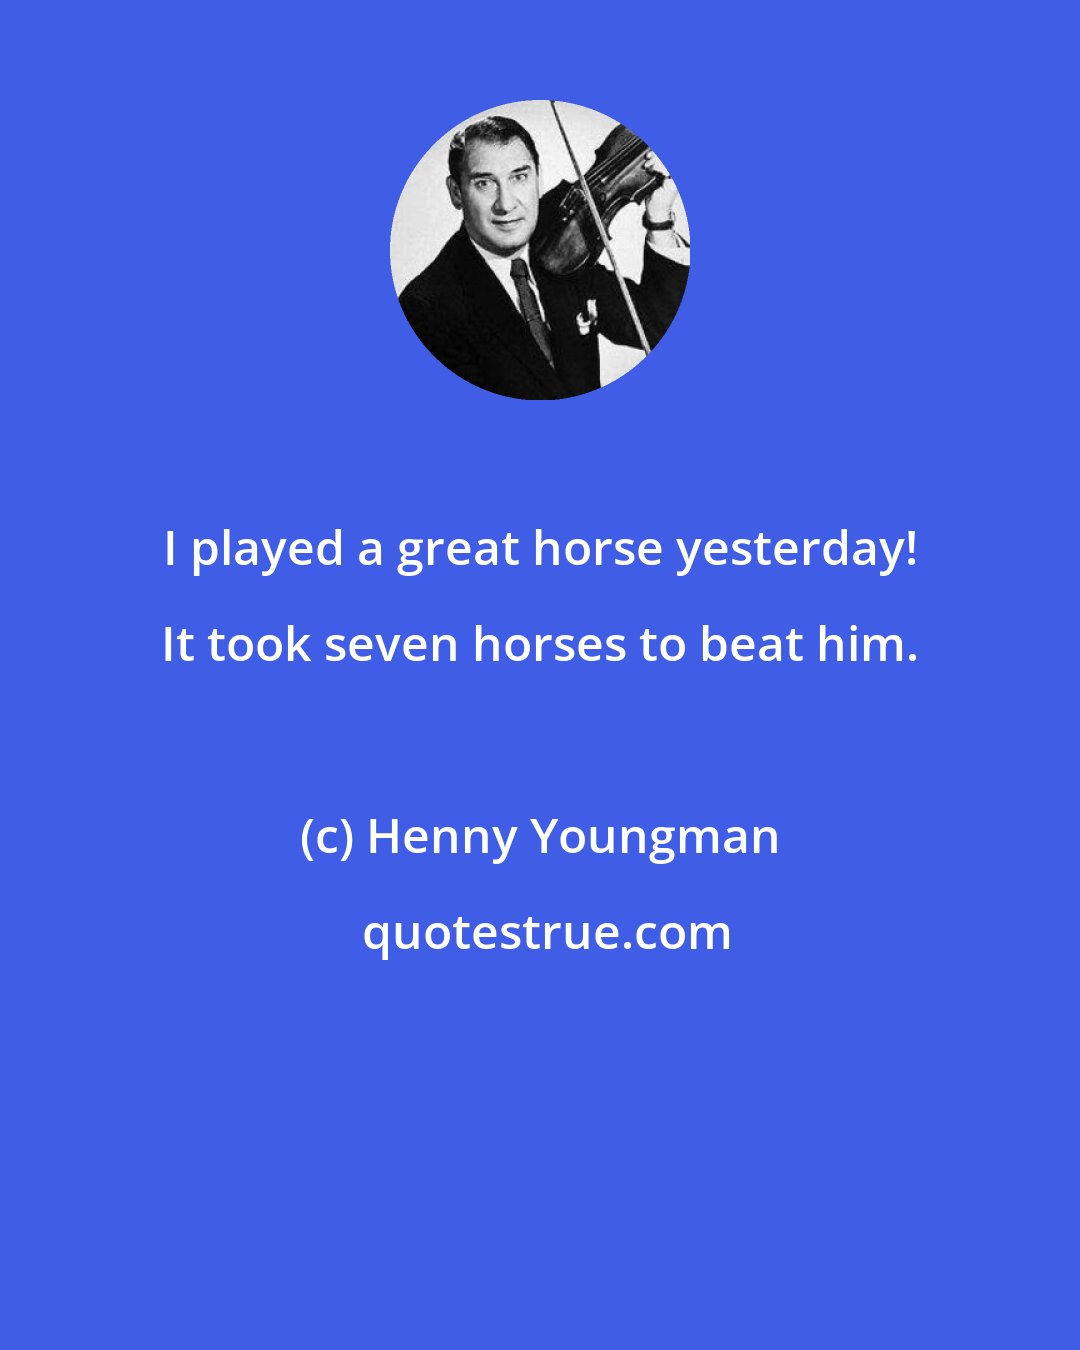 Henny Youngman: I played a great horse yesterday! It took seven horses to beat him.